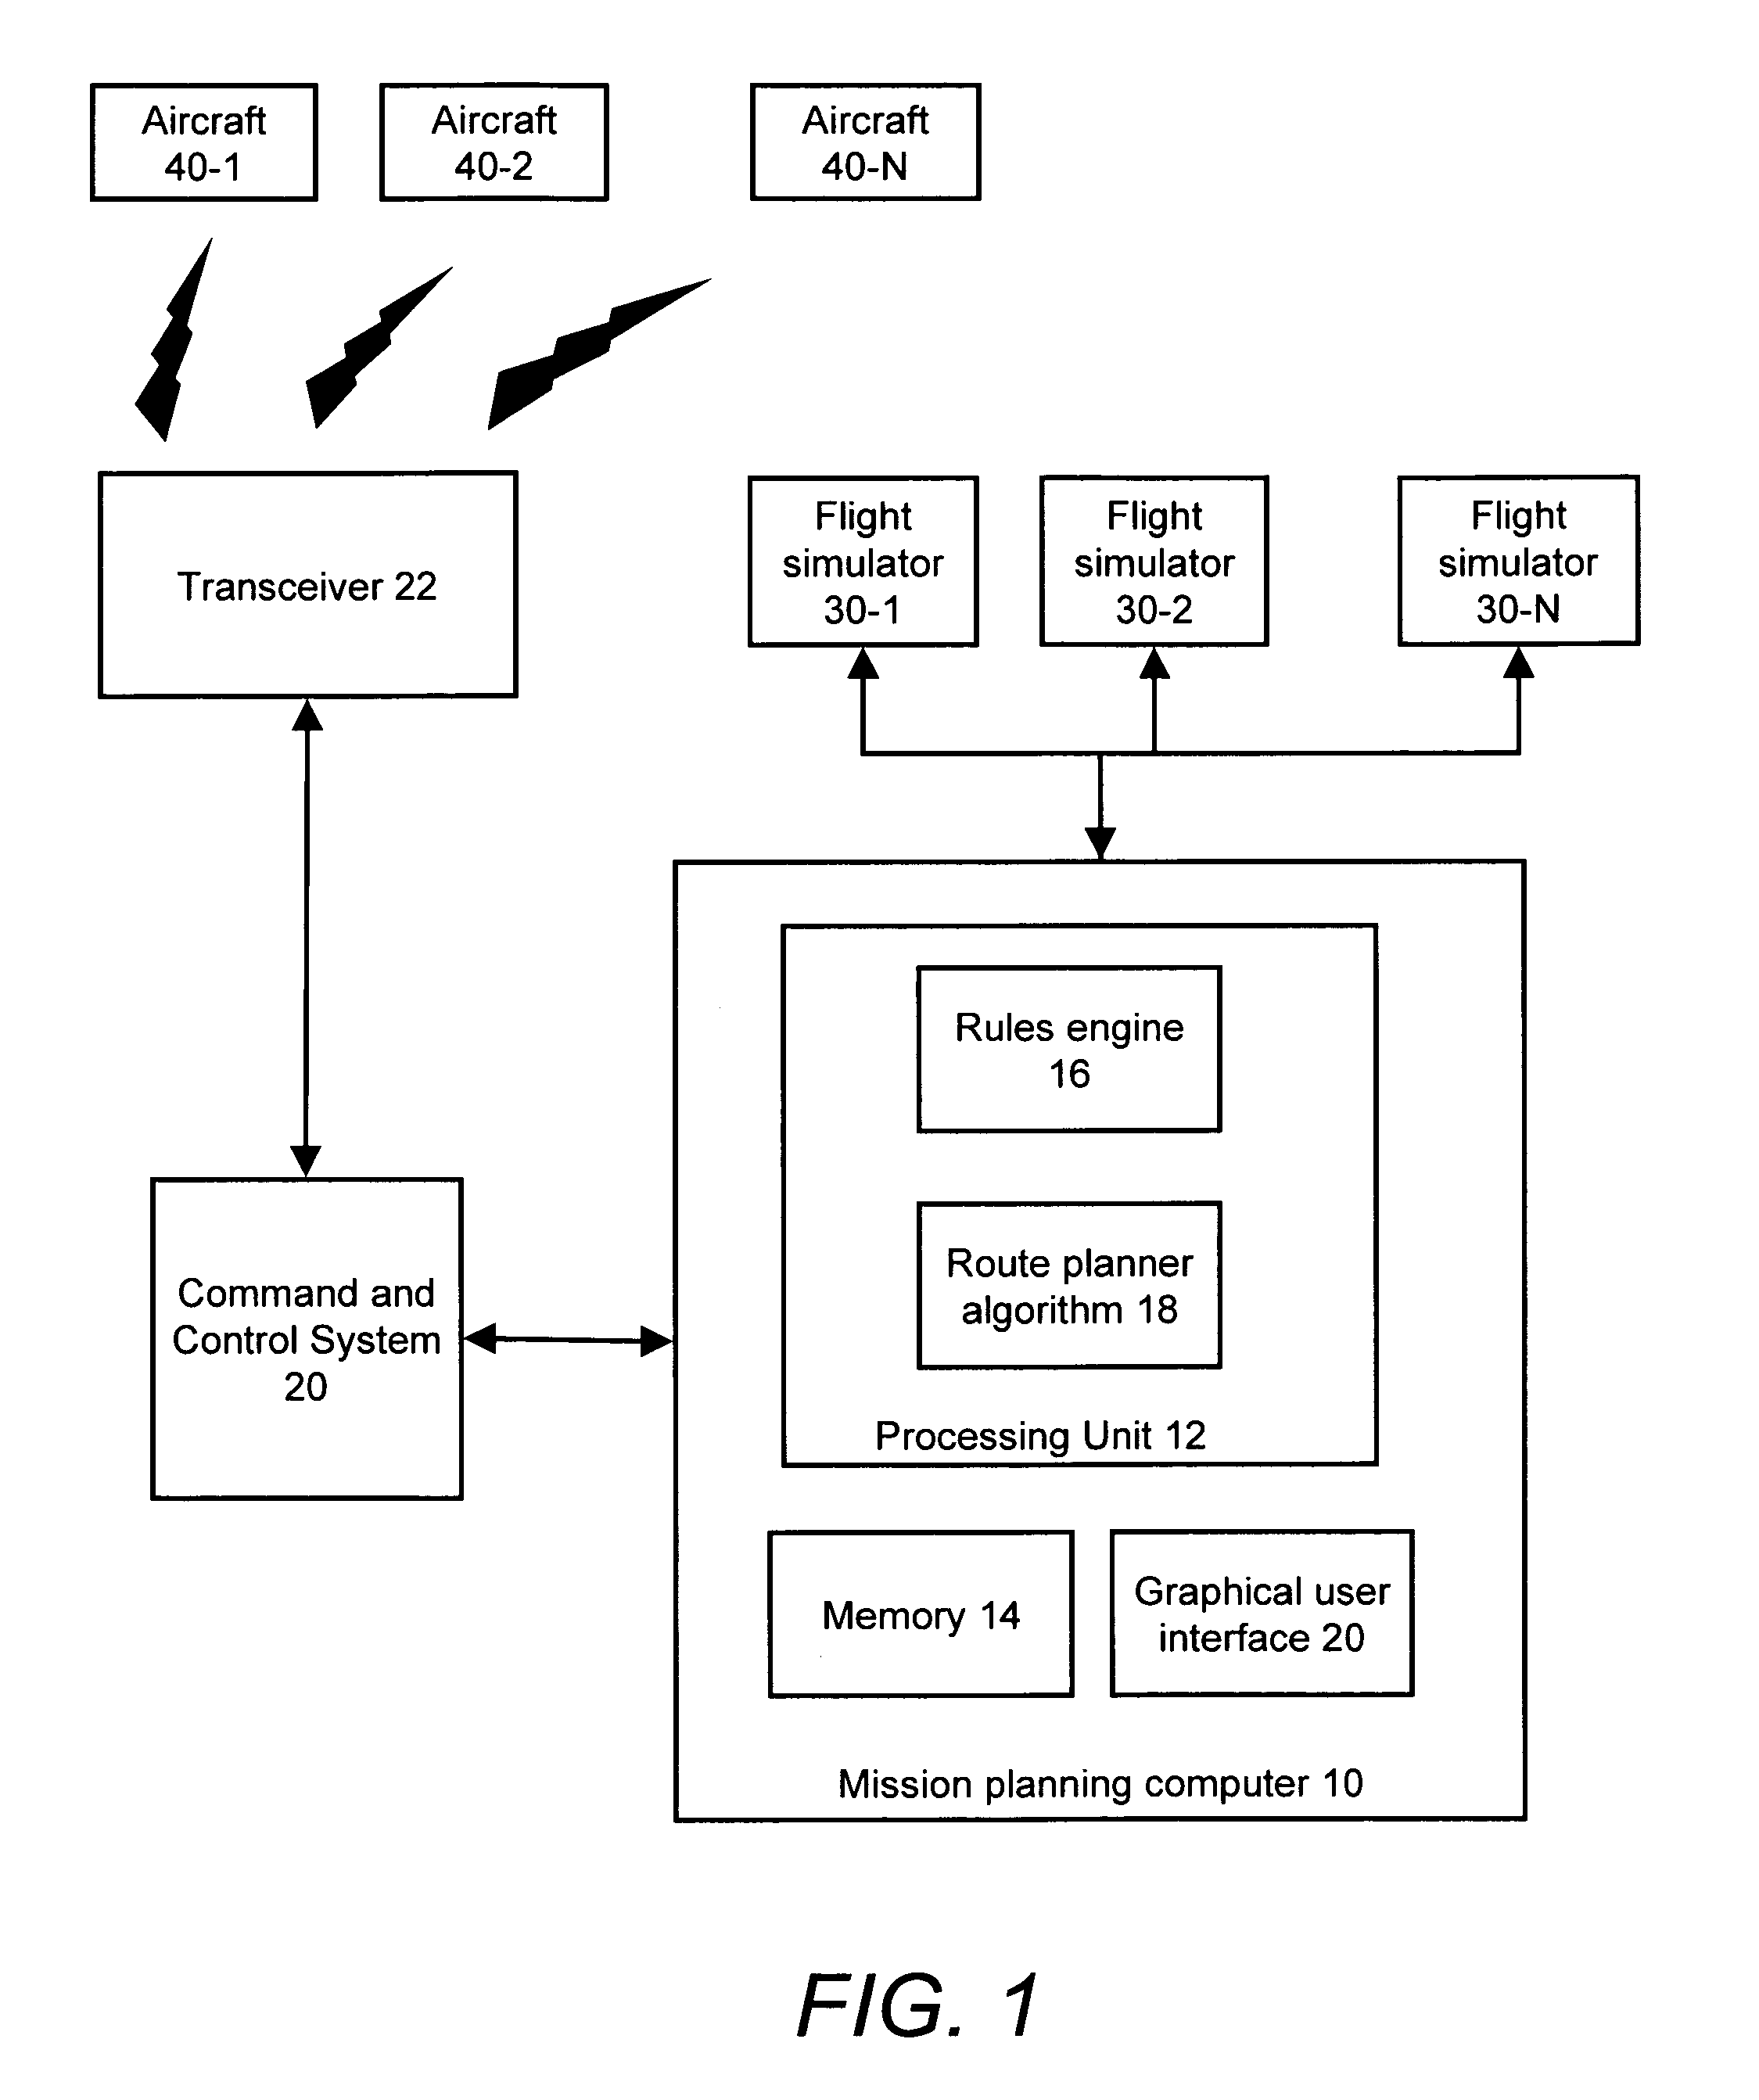 Method and system for route planning of aircraft using rule-based expert system and threat assessment